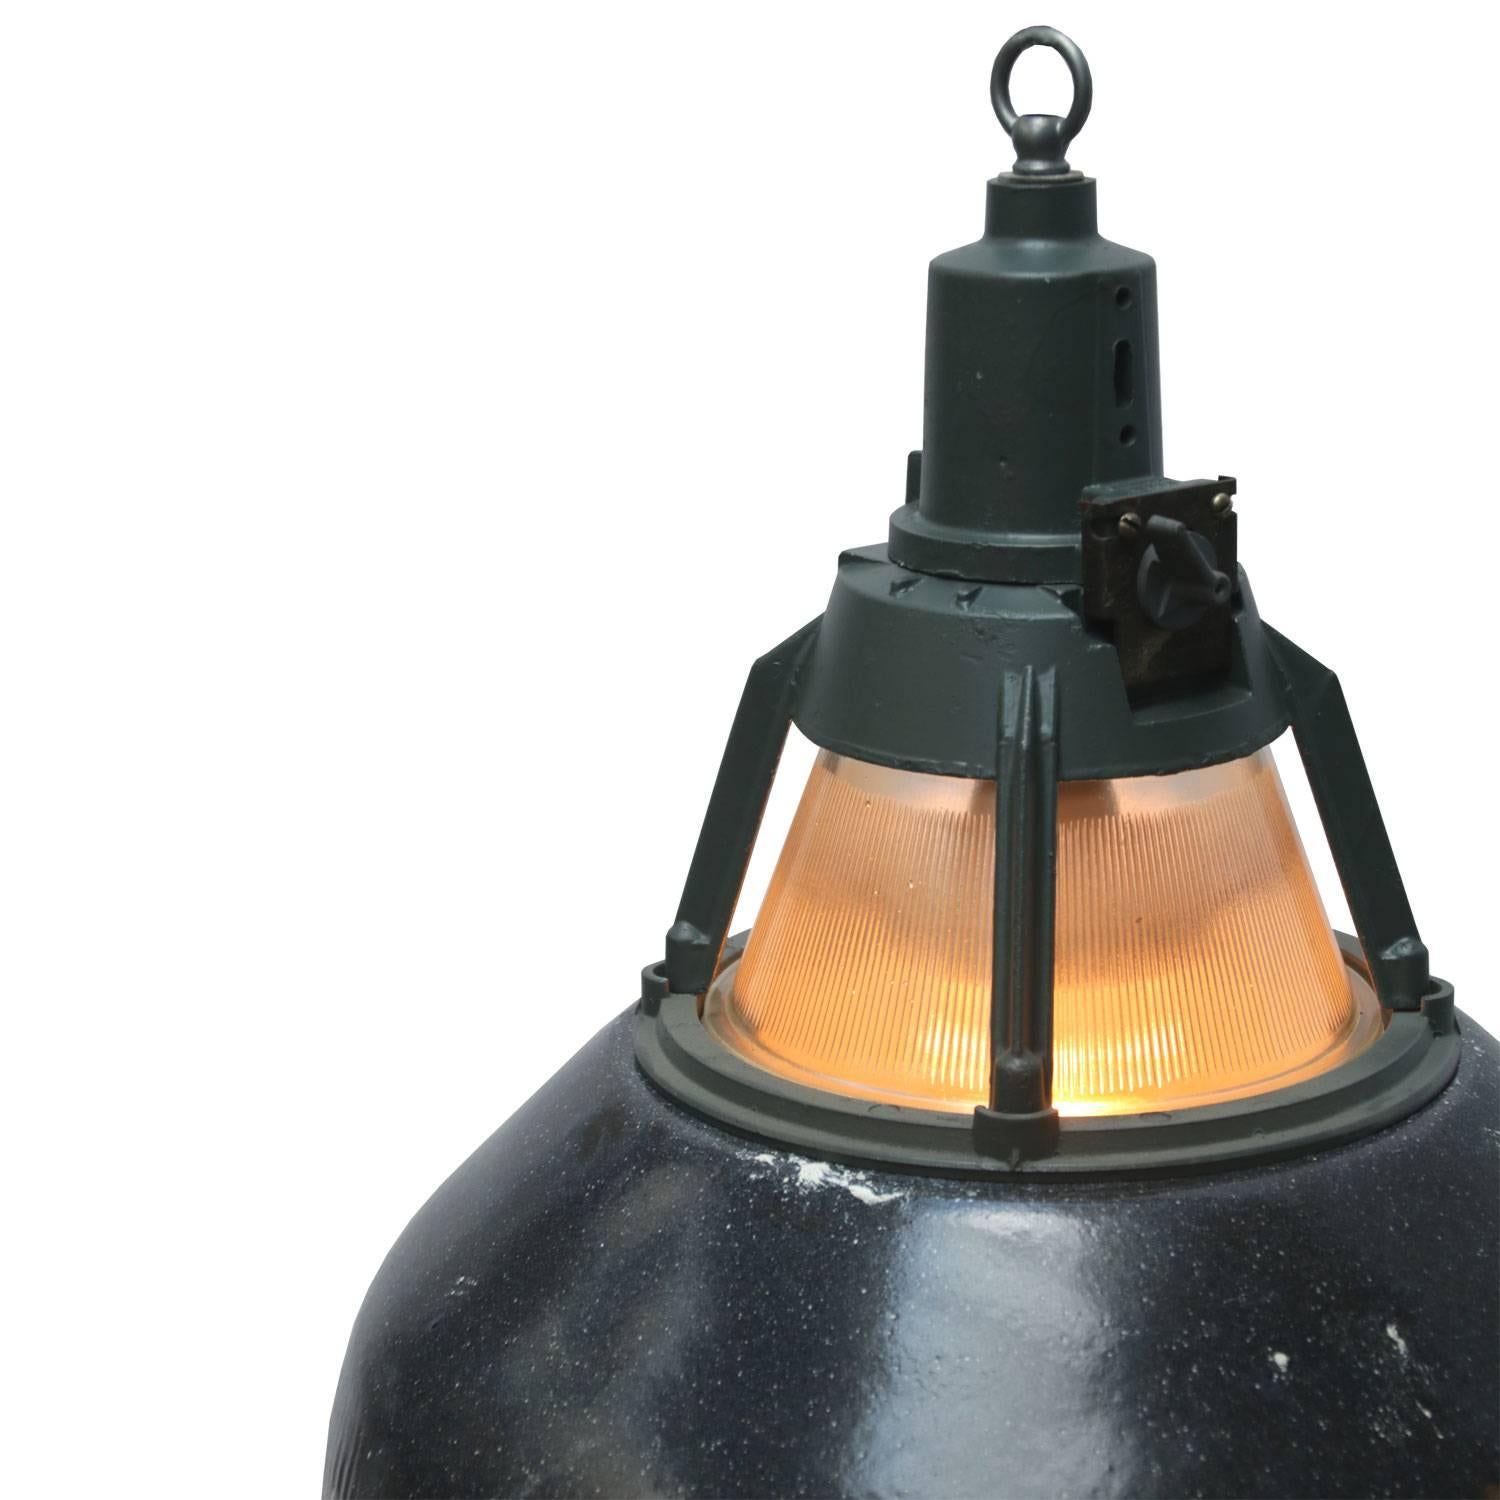 Enamel Industrial pendant. Green enamel shade, white inside.
Dark grey/green cast aluminium top.

Weight: 2.8 kg / 6.2 lb

All lamps have been made suitable by international standards for incandescent light bulbs, energy-efficient and LED bulbs.